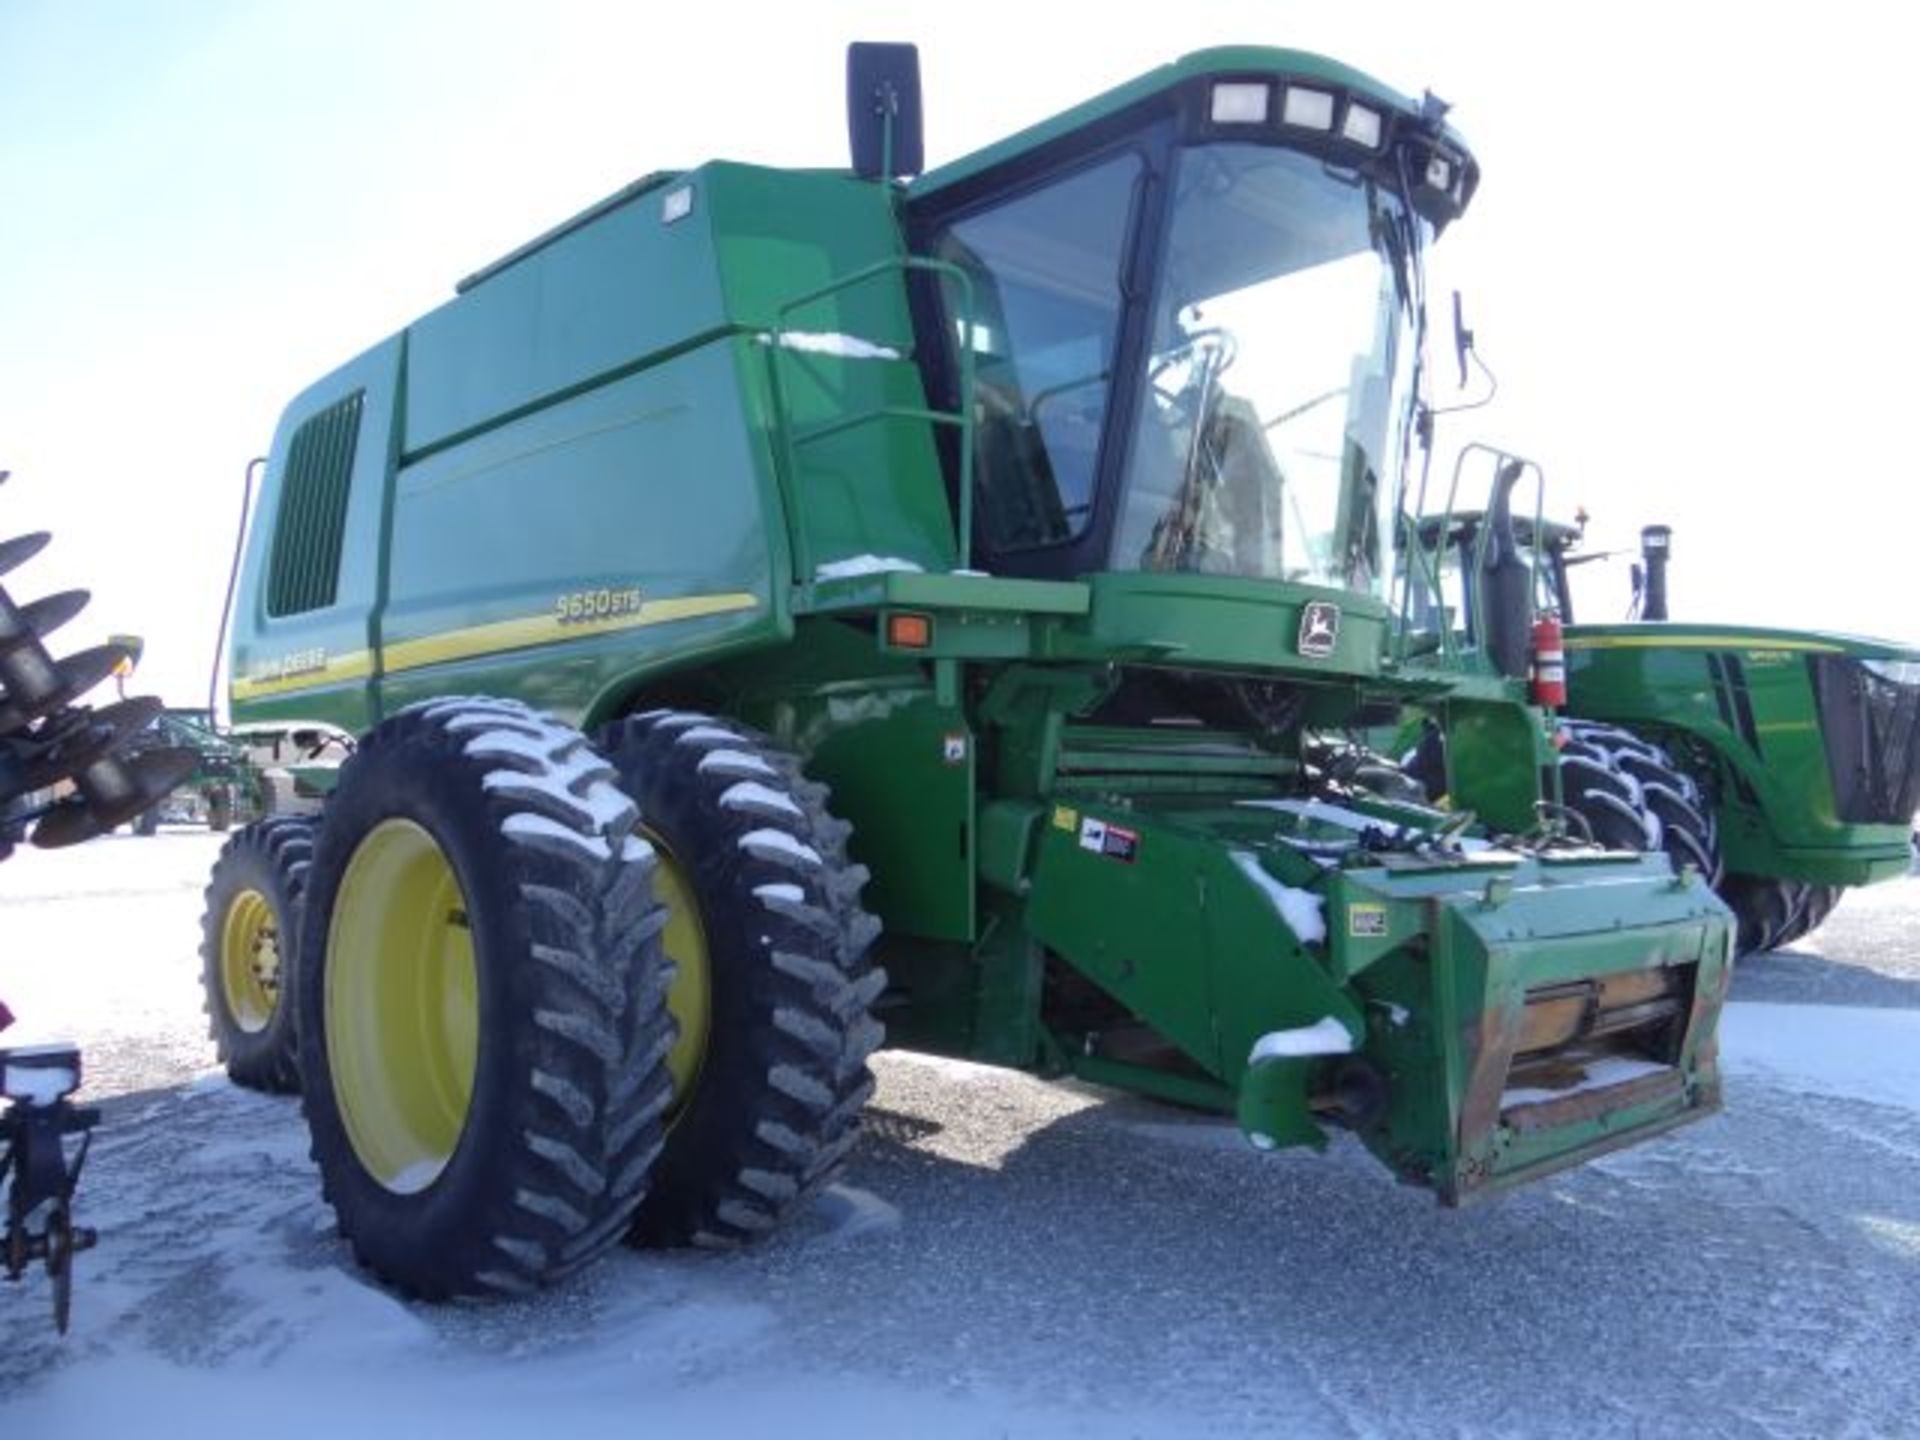 JD 9650STS Combine, 2001 #155342 Front tires Duals Goodyear 18.4x42. Rear 18.4x26. Aftermarket